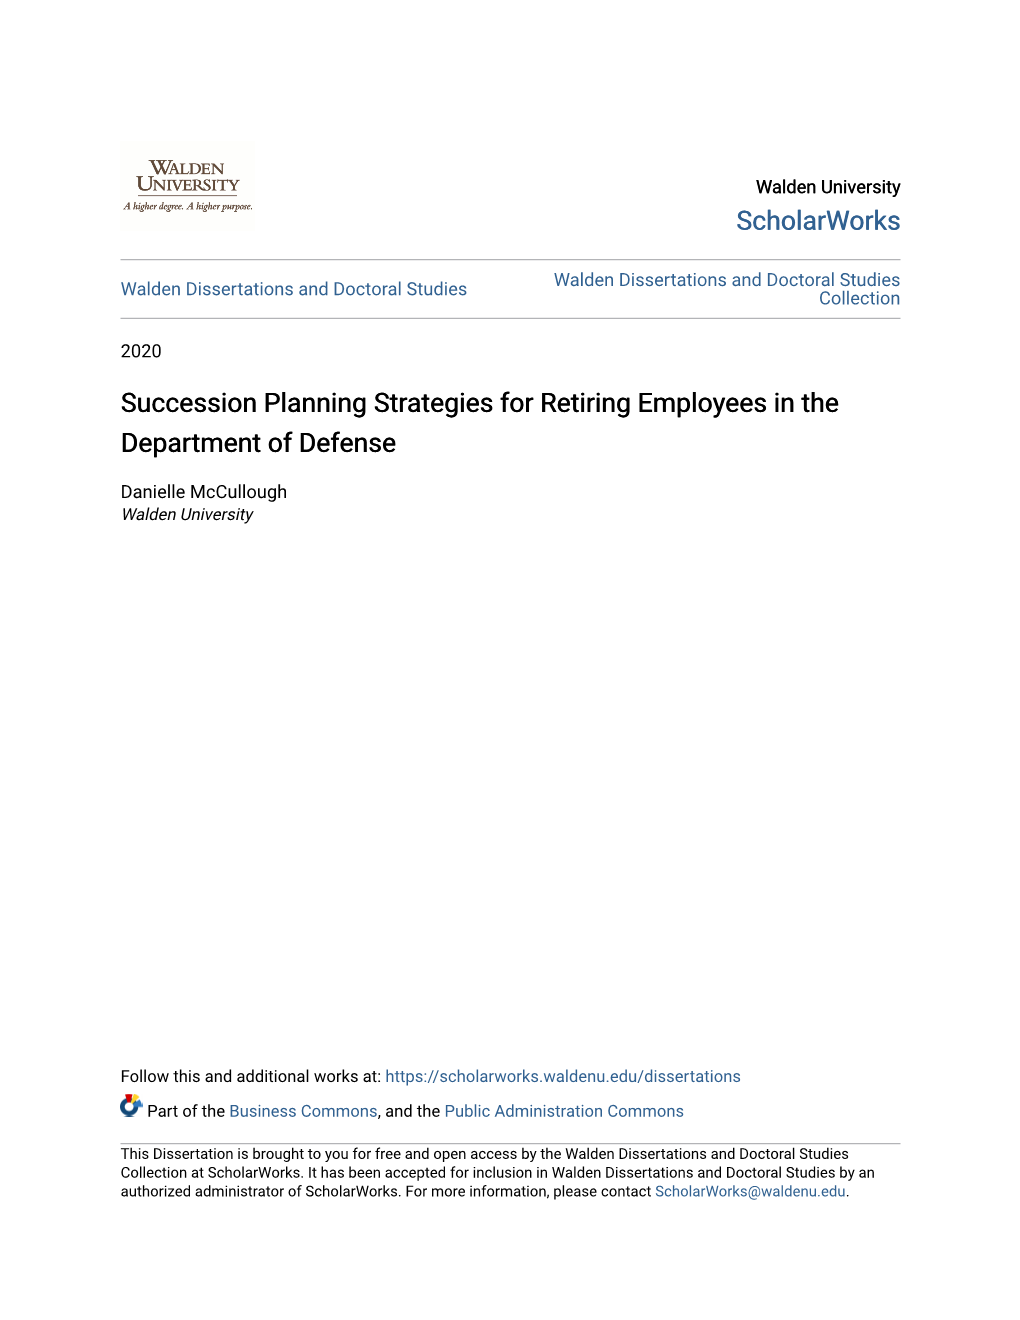 Succession Planning Strategies for Retiring Employees in the Department of Defense